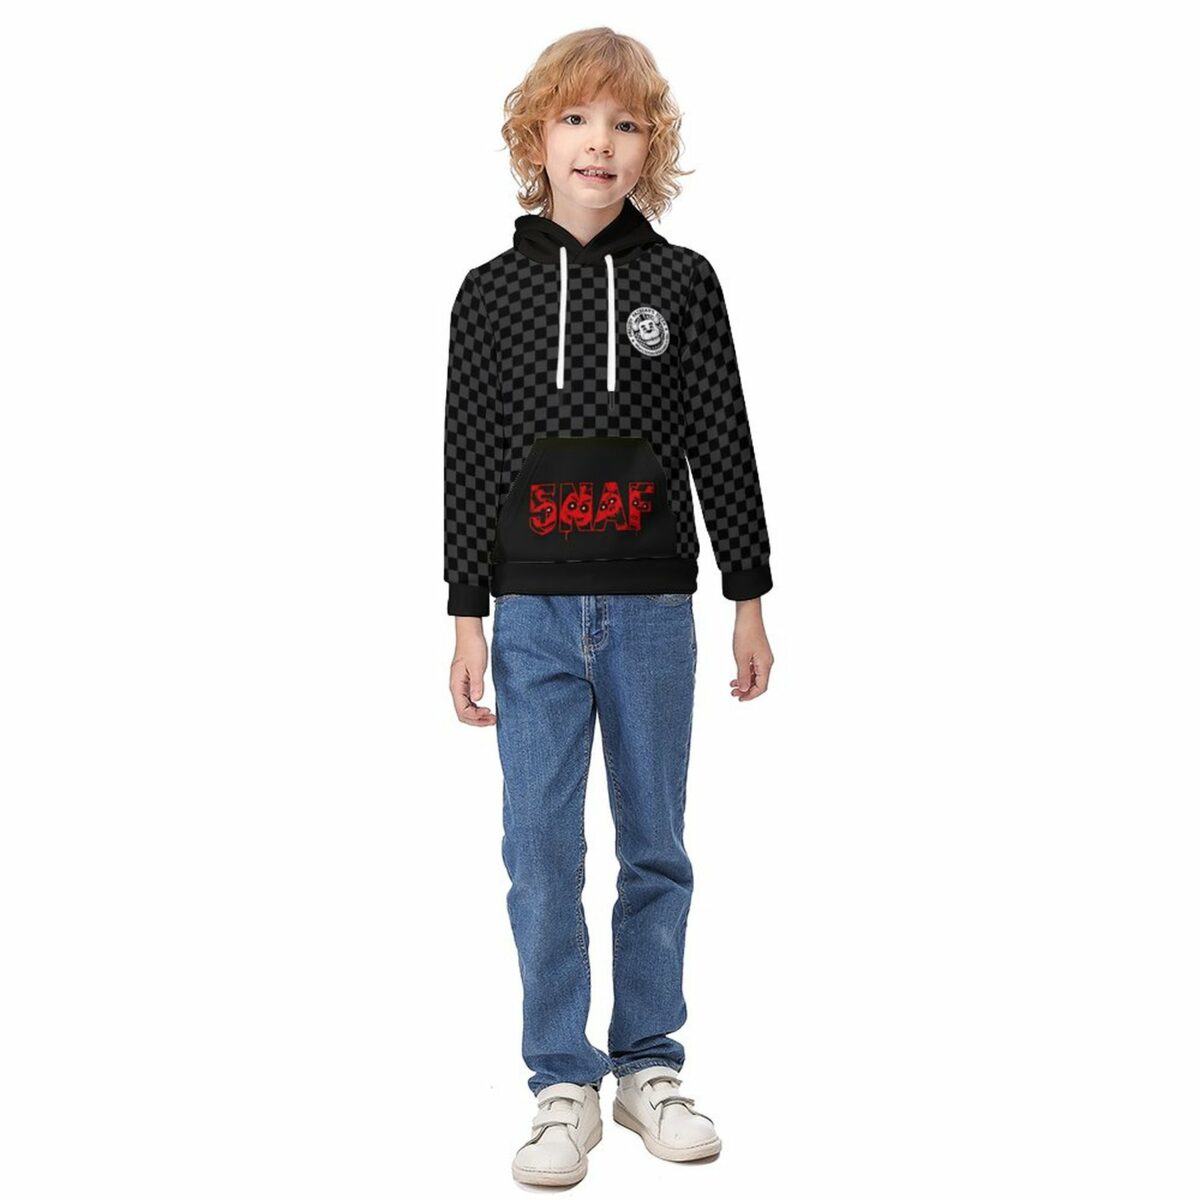 Five Nights At Freddy’s 230gsm Hoodie for Kids (All-Over Printing) Cool Kiddo 20